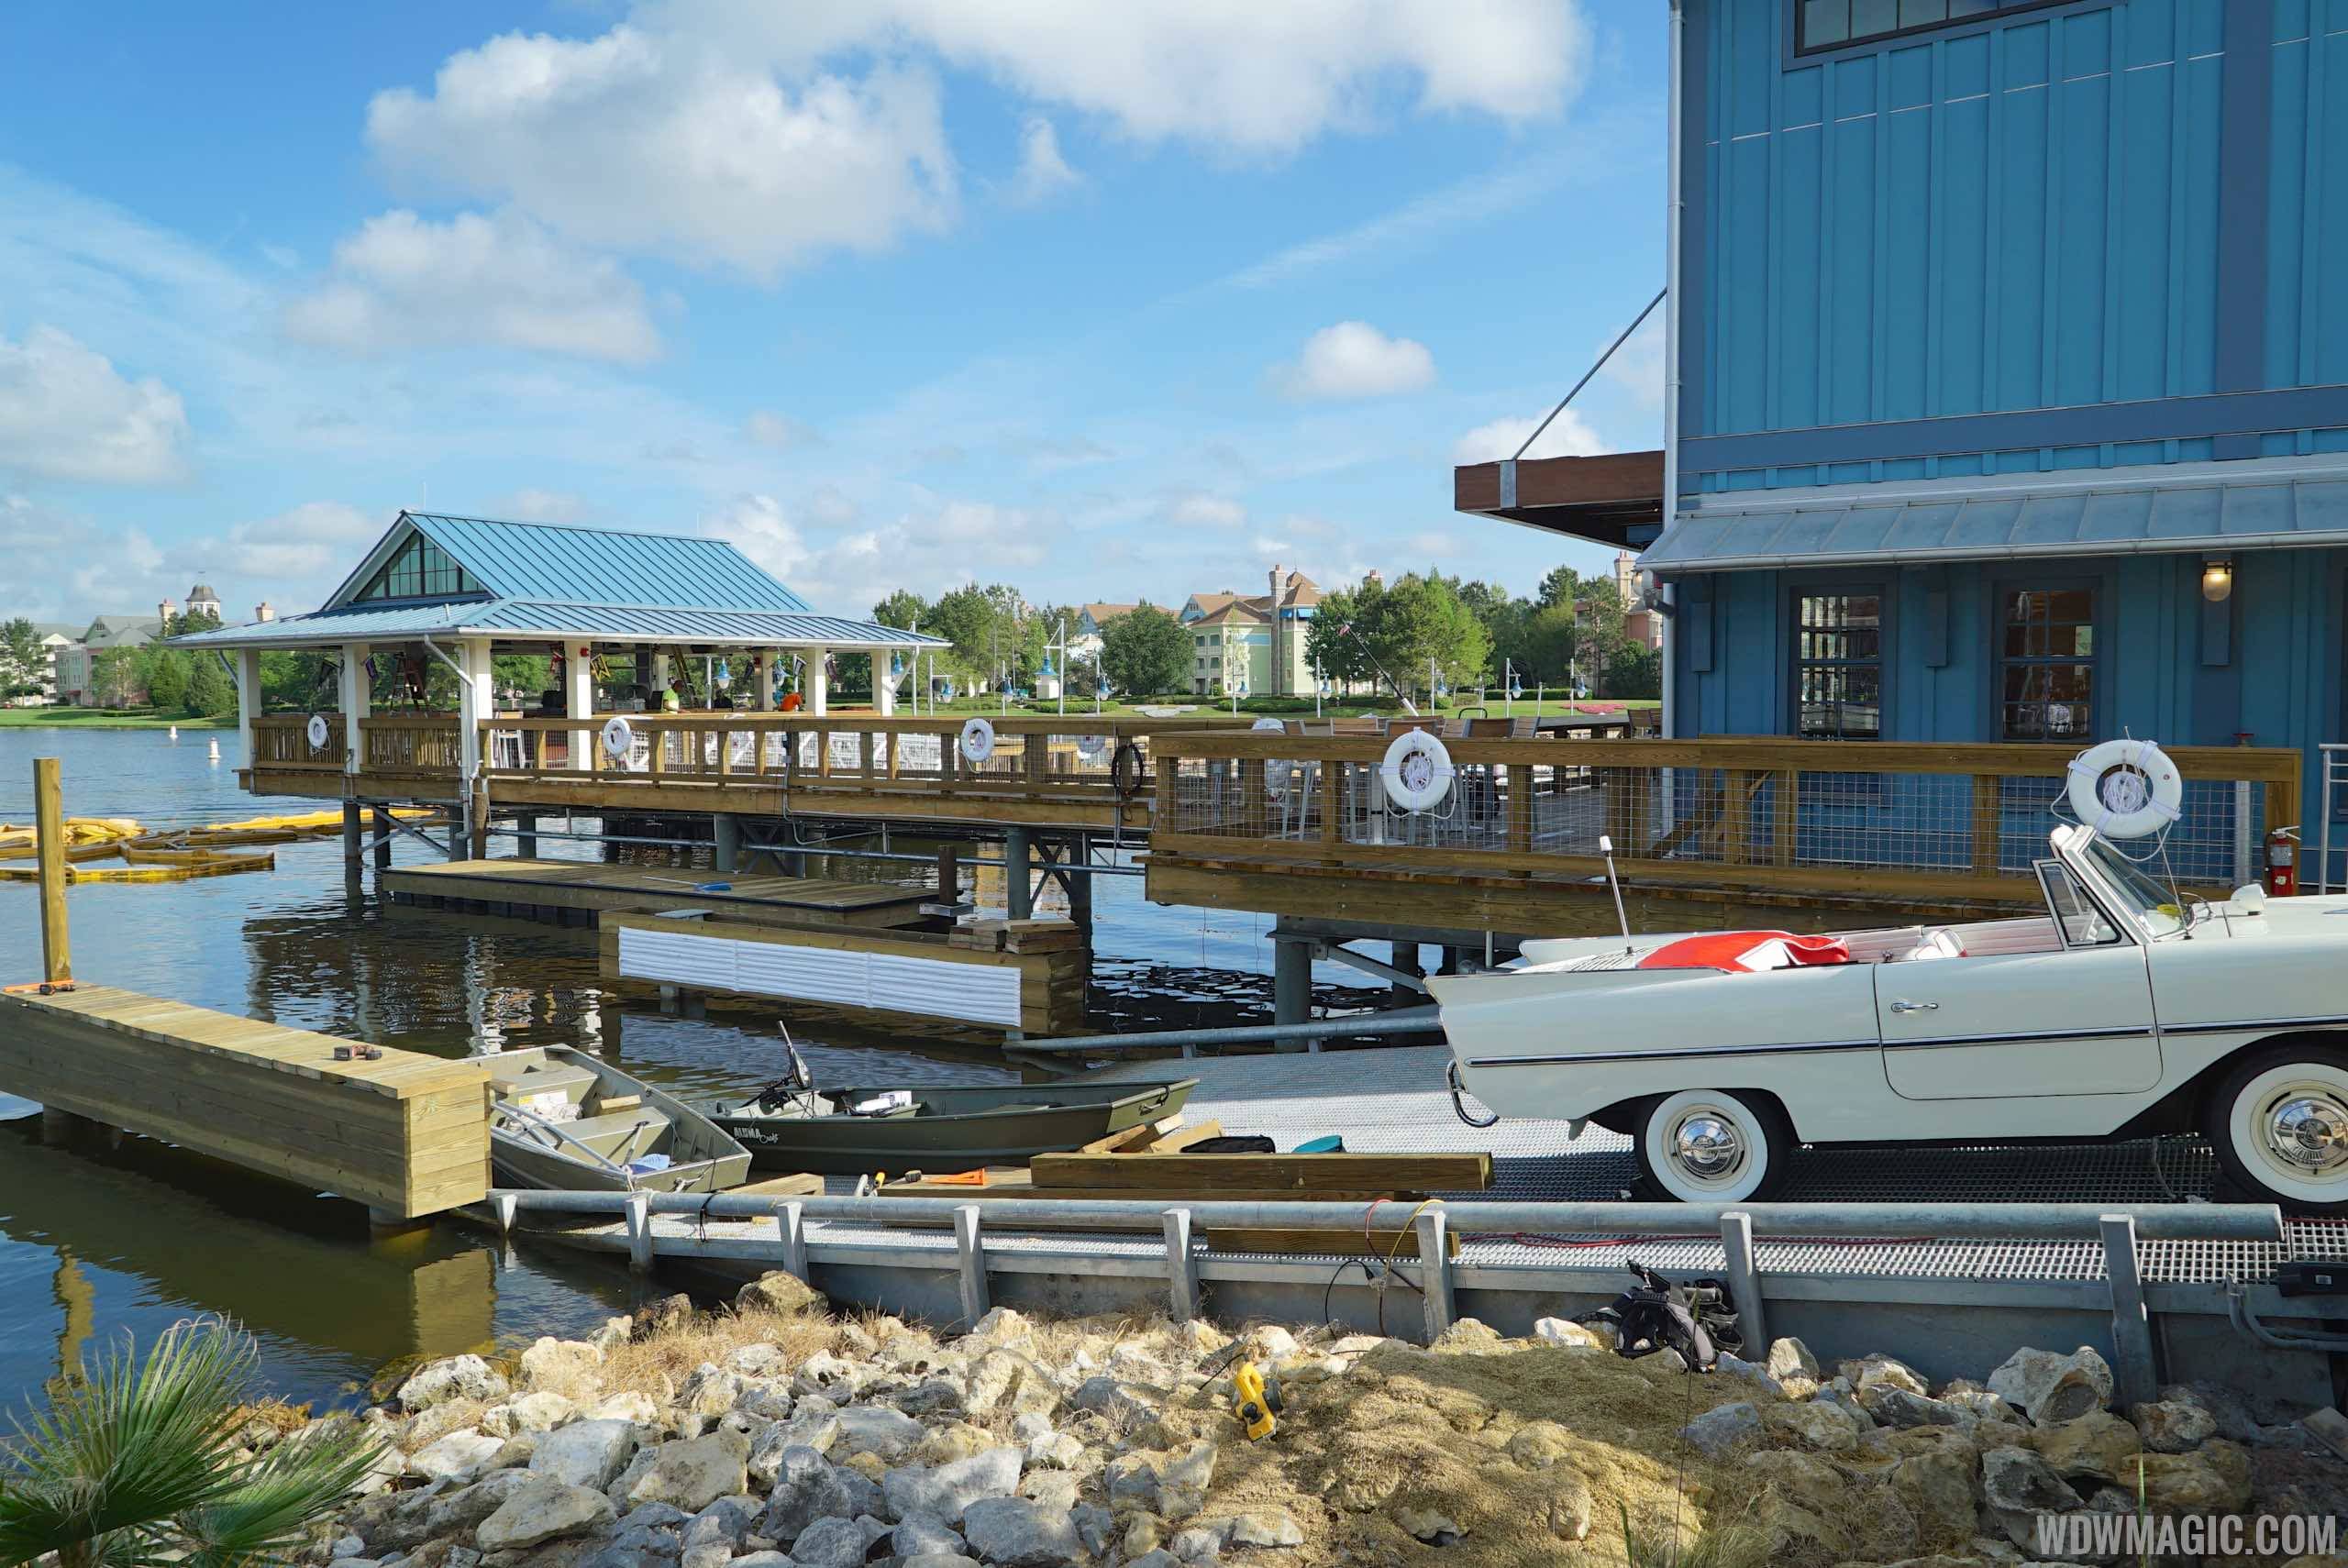 PHOTOS - Latest look at The BOATHOUSE at Disney Springs